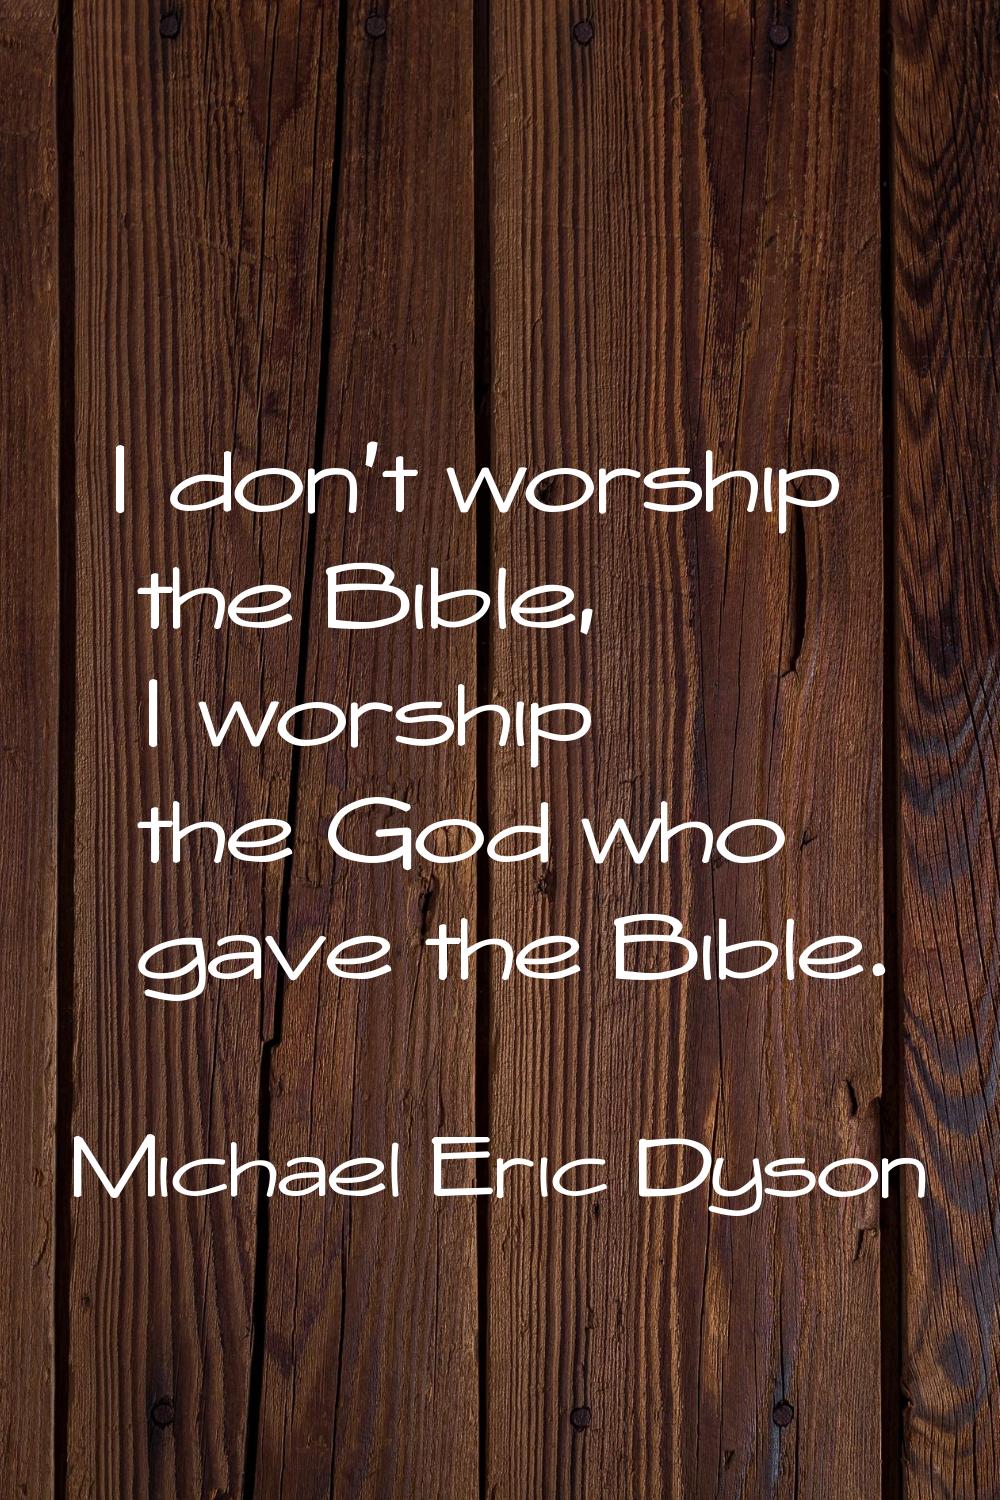 I don't worship the Bible, I worship the God who gave the Bible.